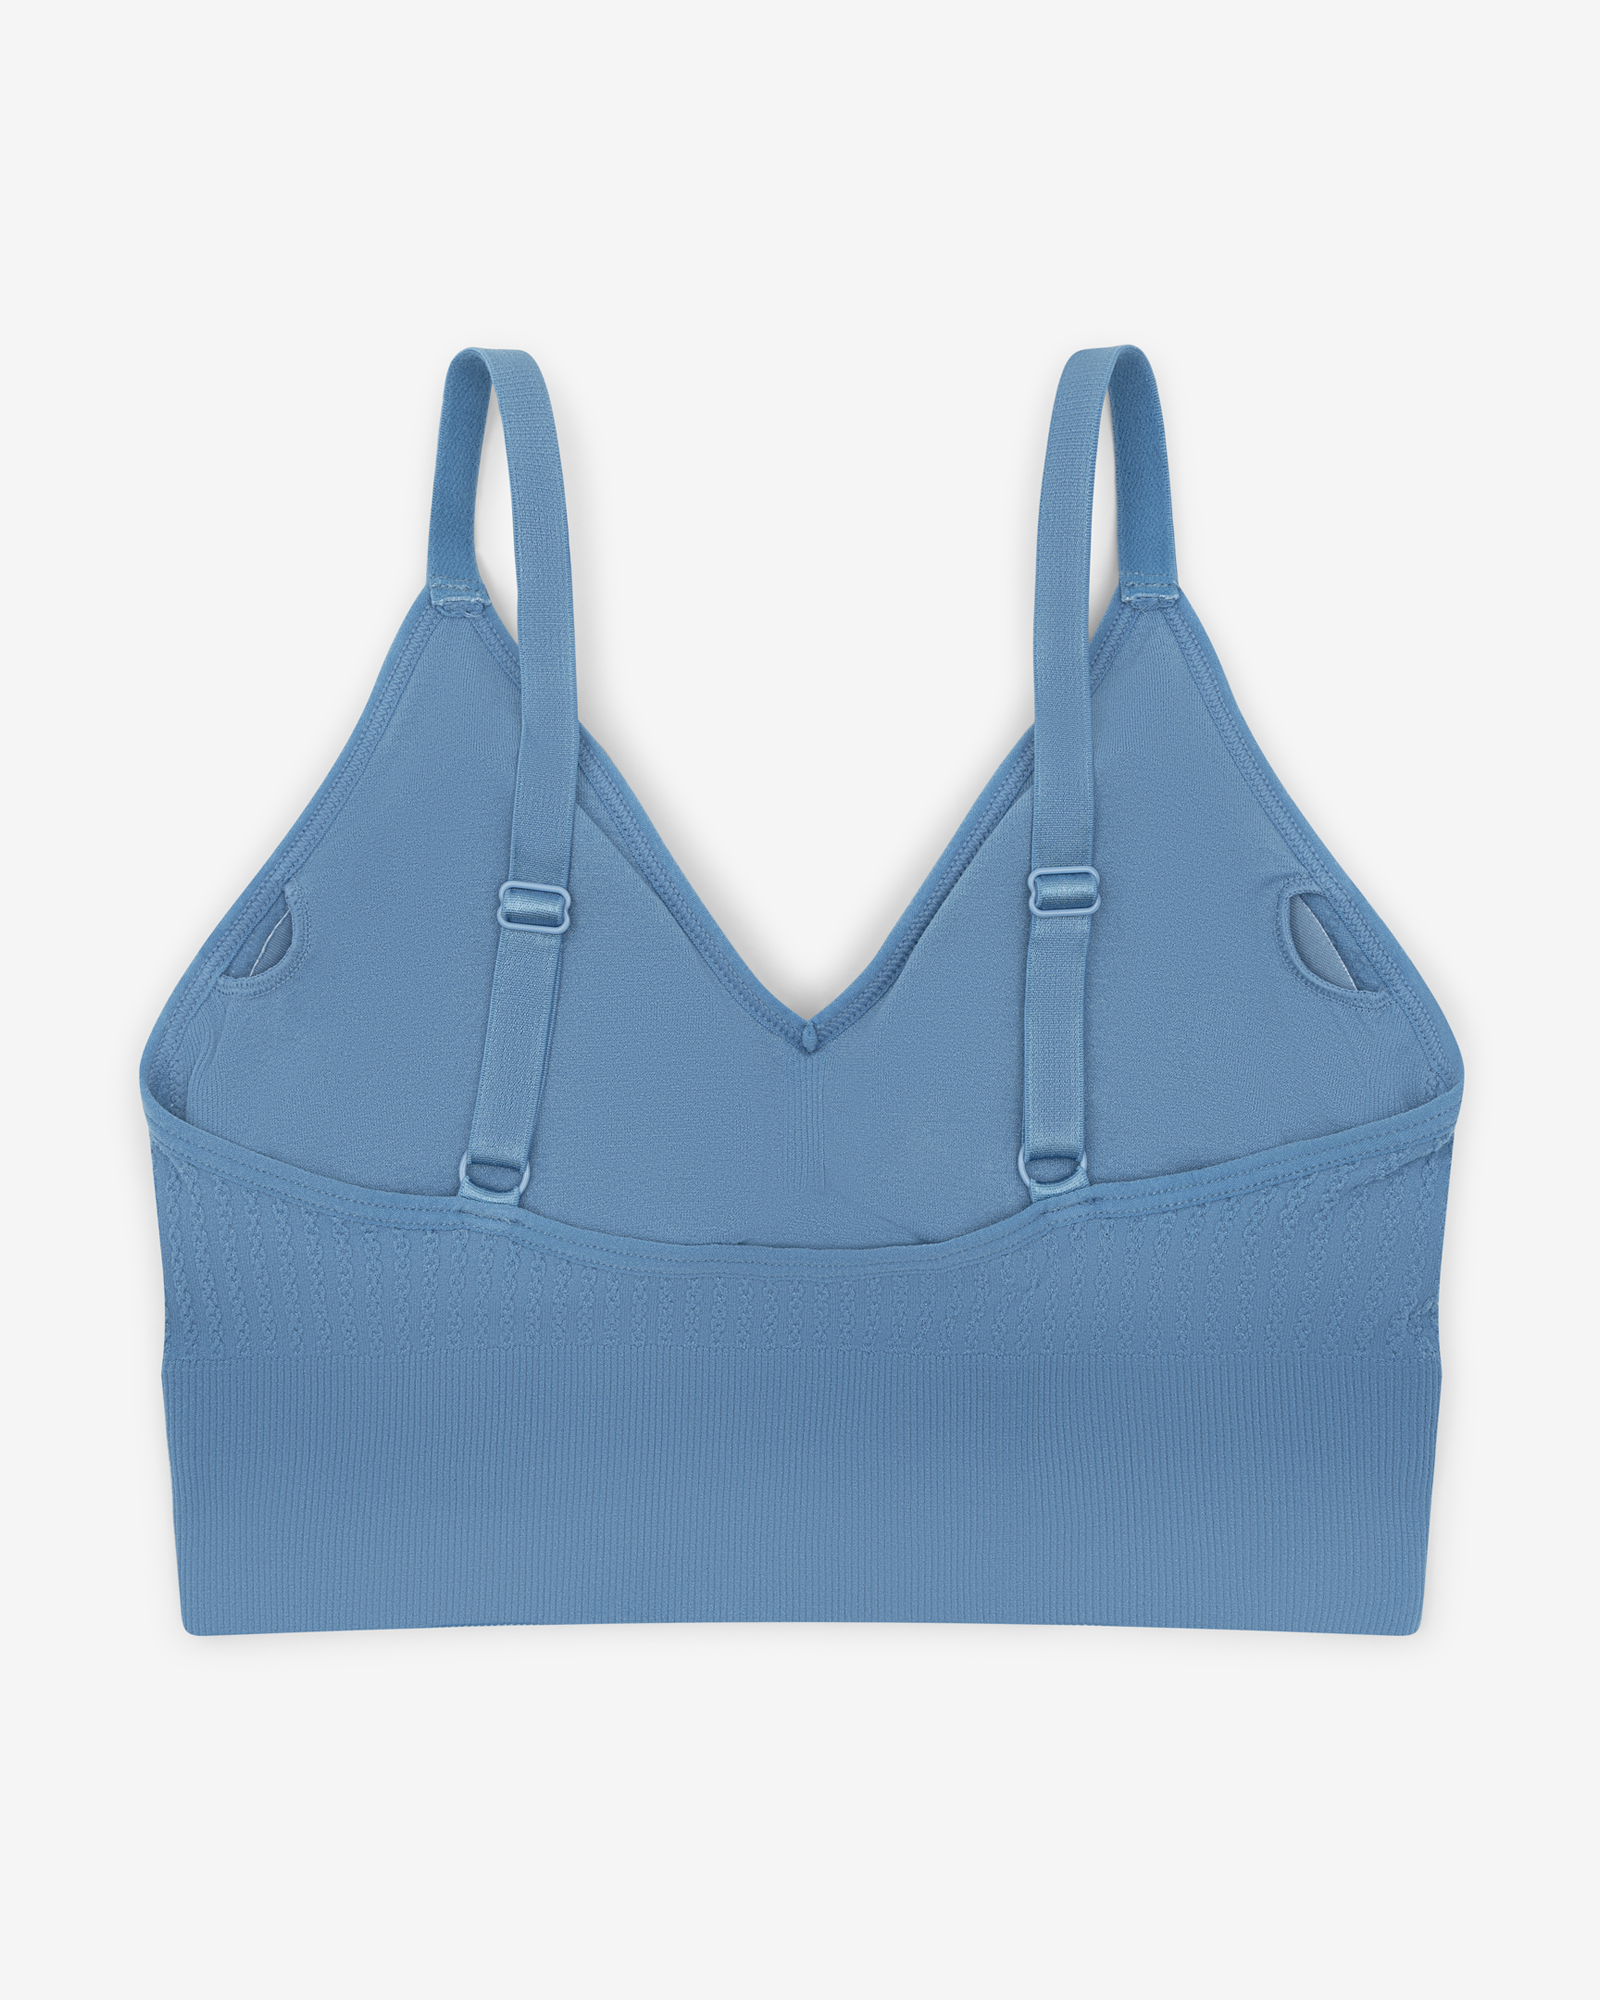 Layer 8 Maximum Support 2 Pack Sports Bra SMALL Blue/Gray Q-Wick Dry NEW